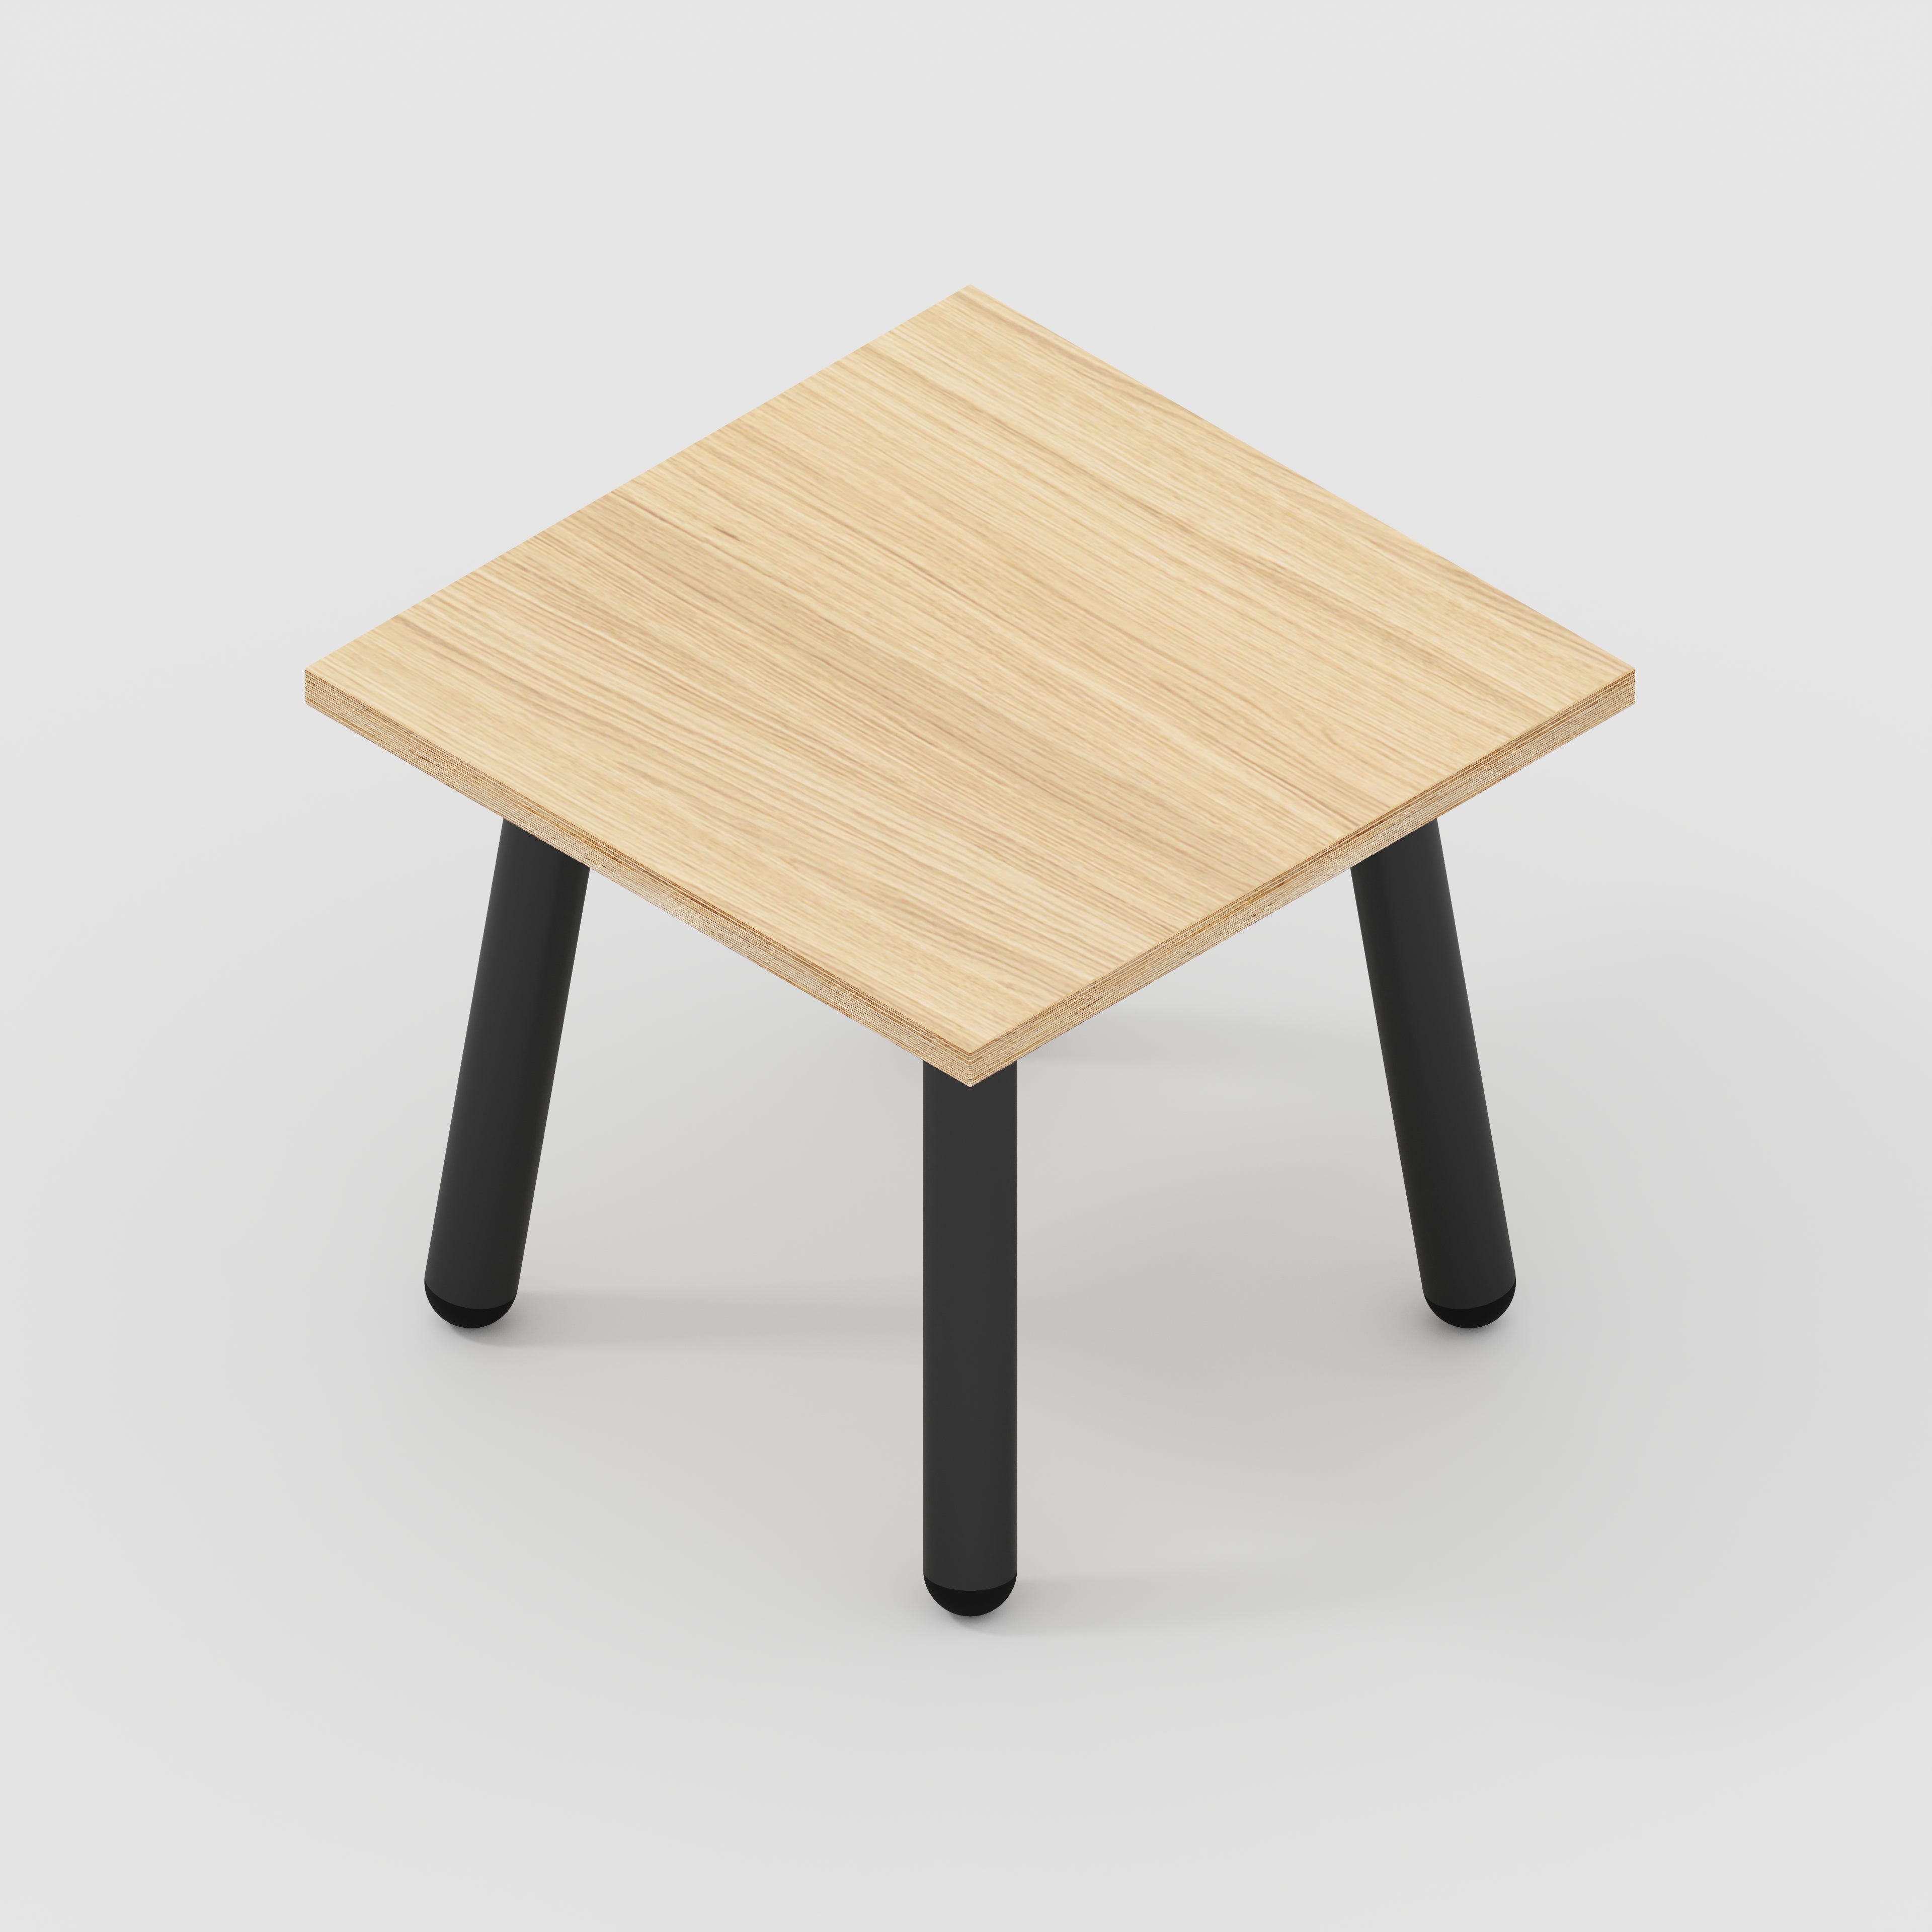 Side Table with Round Single Pin Legs - Plywood Oak - 500(w) x 500(d) x 425(h)